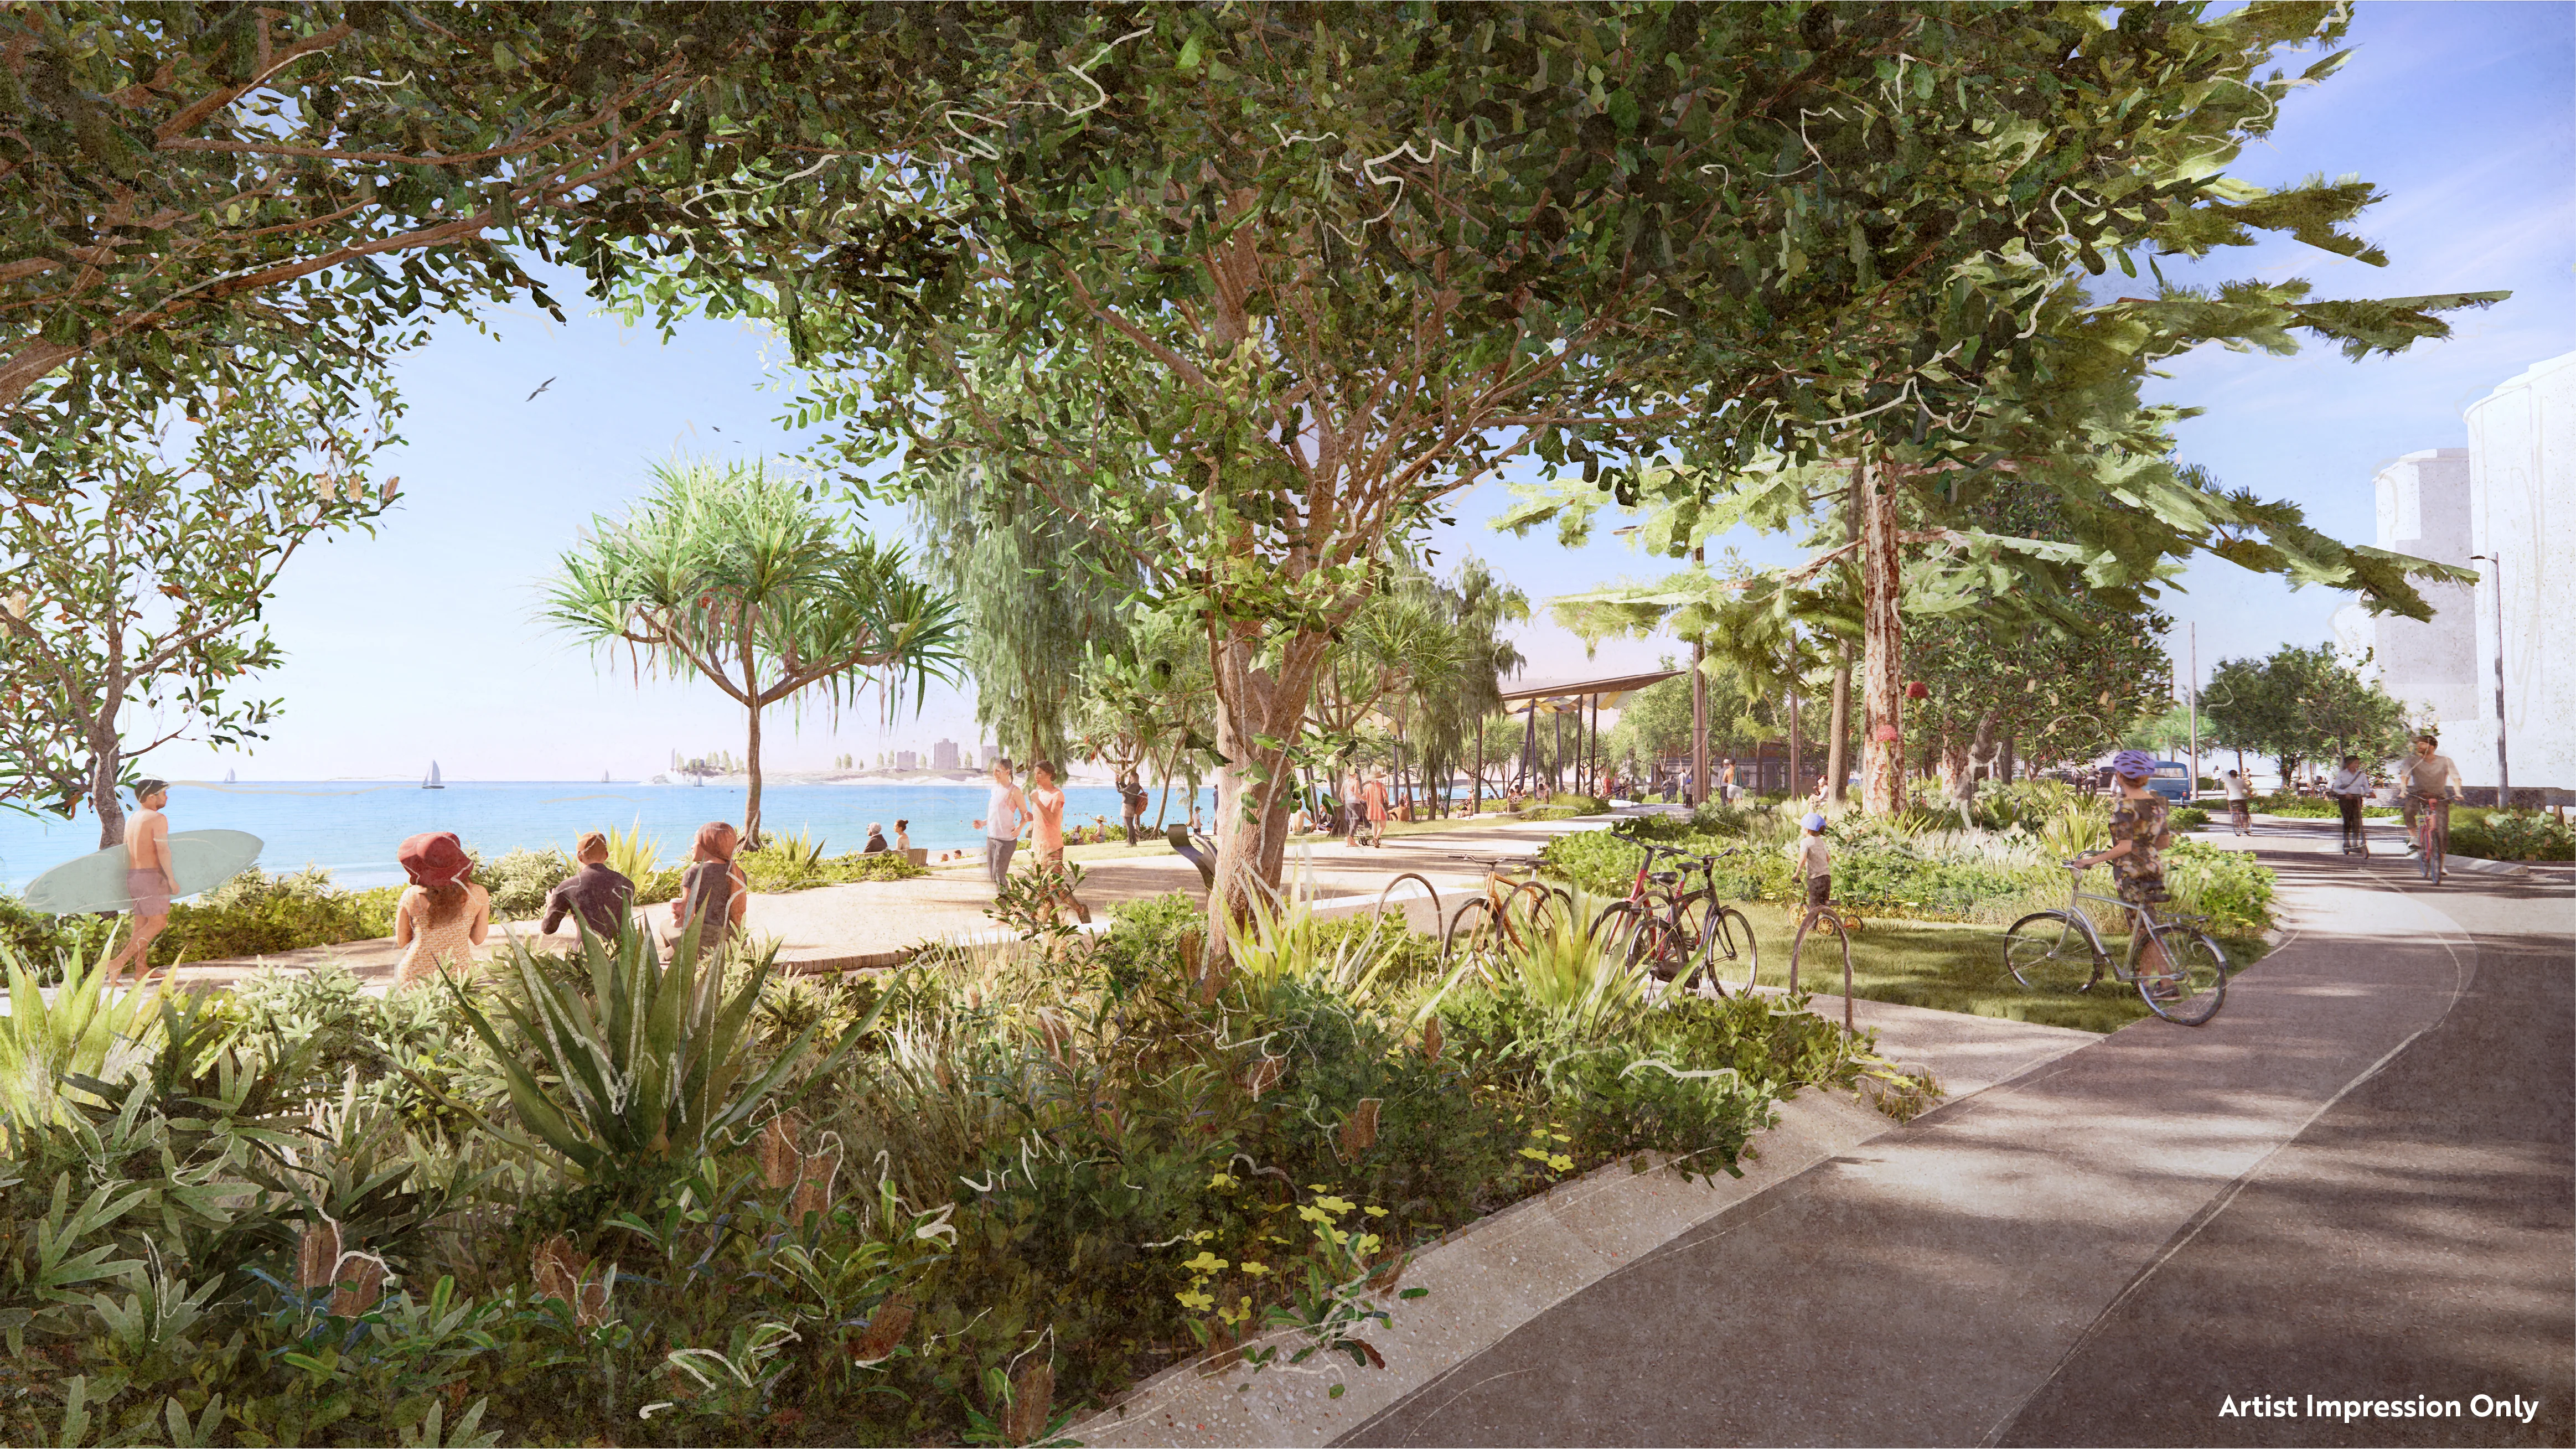 Graphical representation of design of the Central Meeting Place with increased beachfront parkland and new wider pathways to allow for improved connectivity along the foreshore.